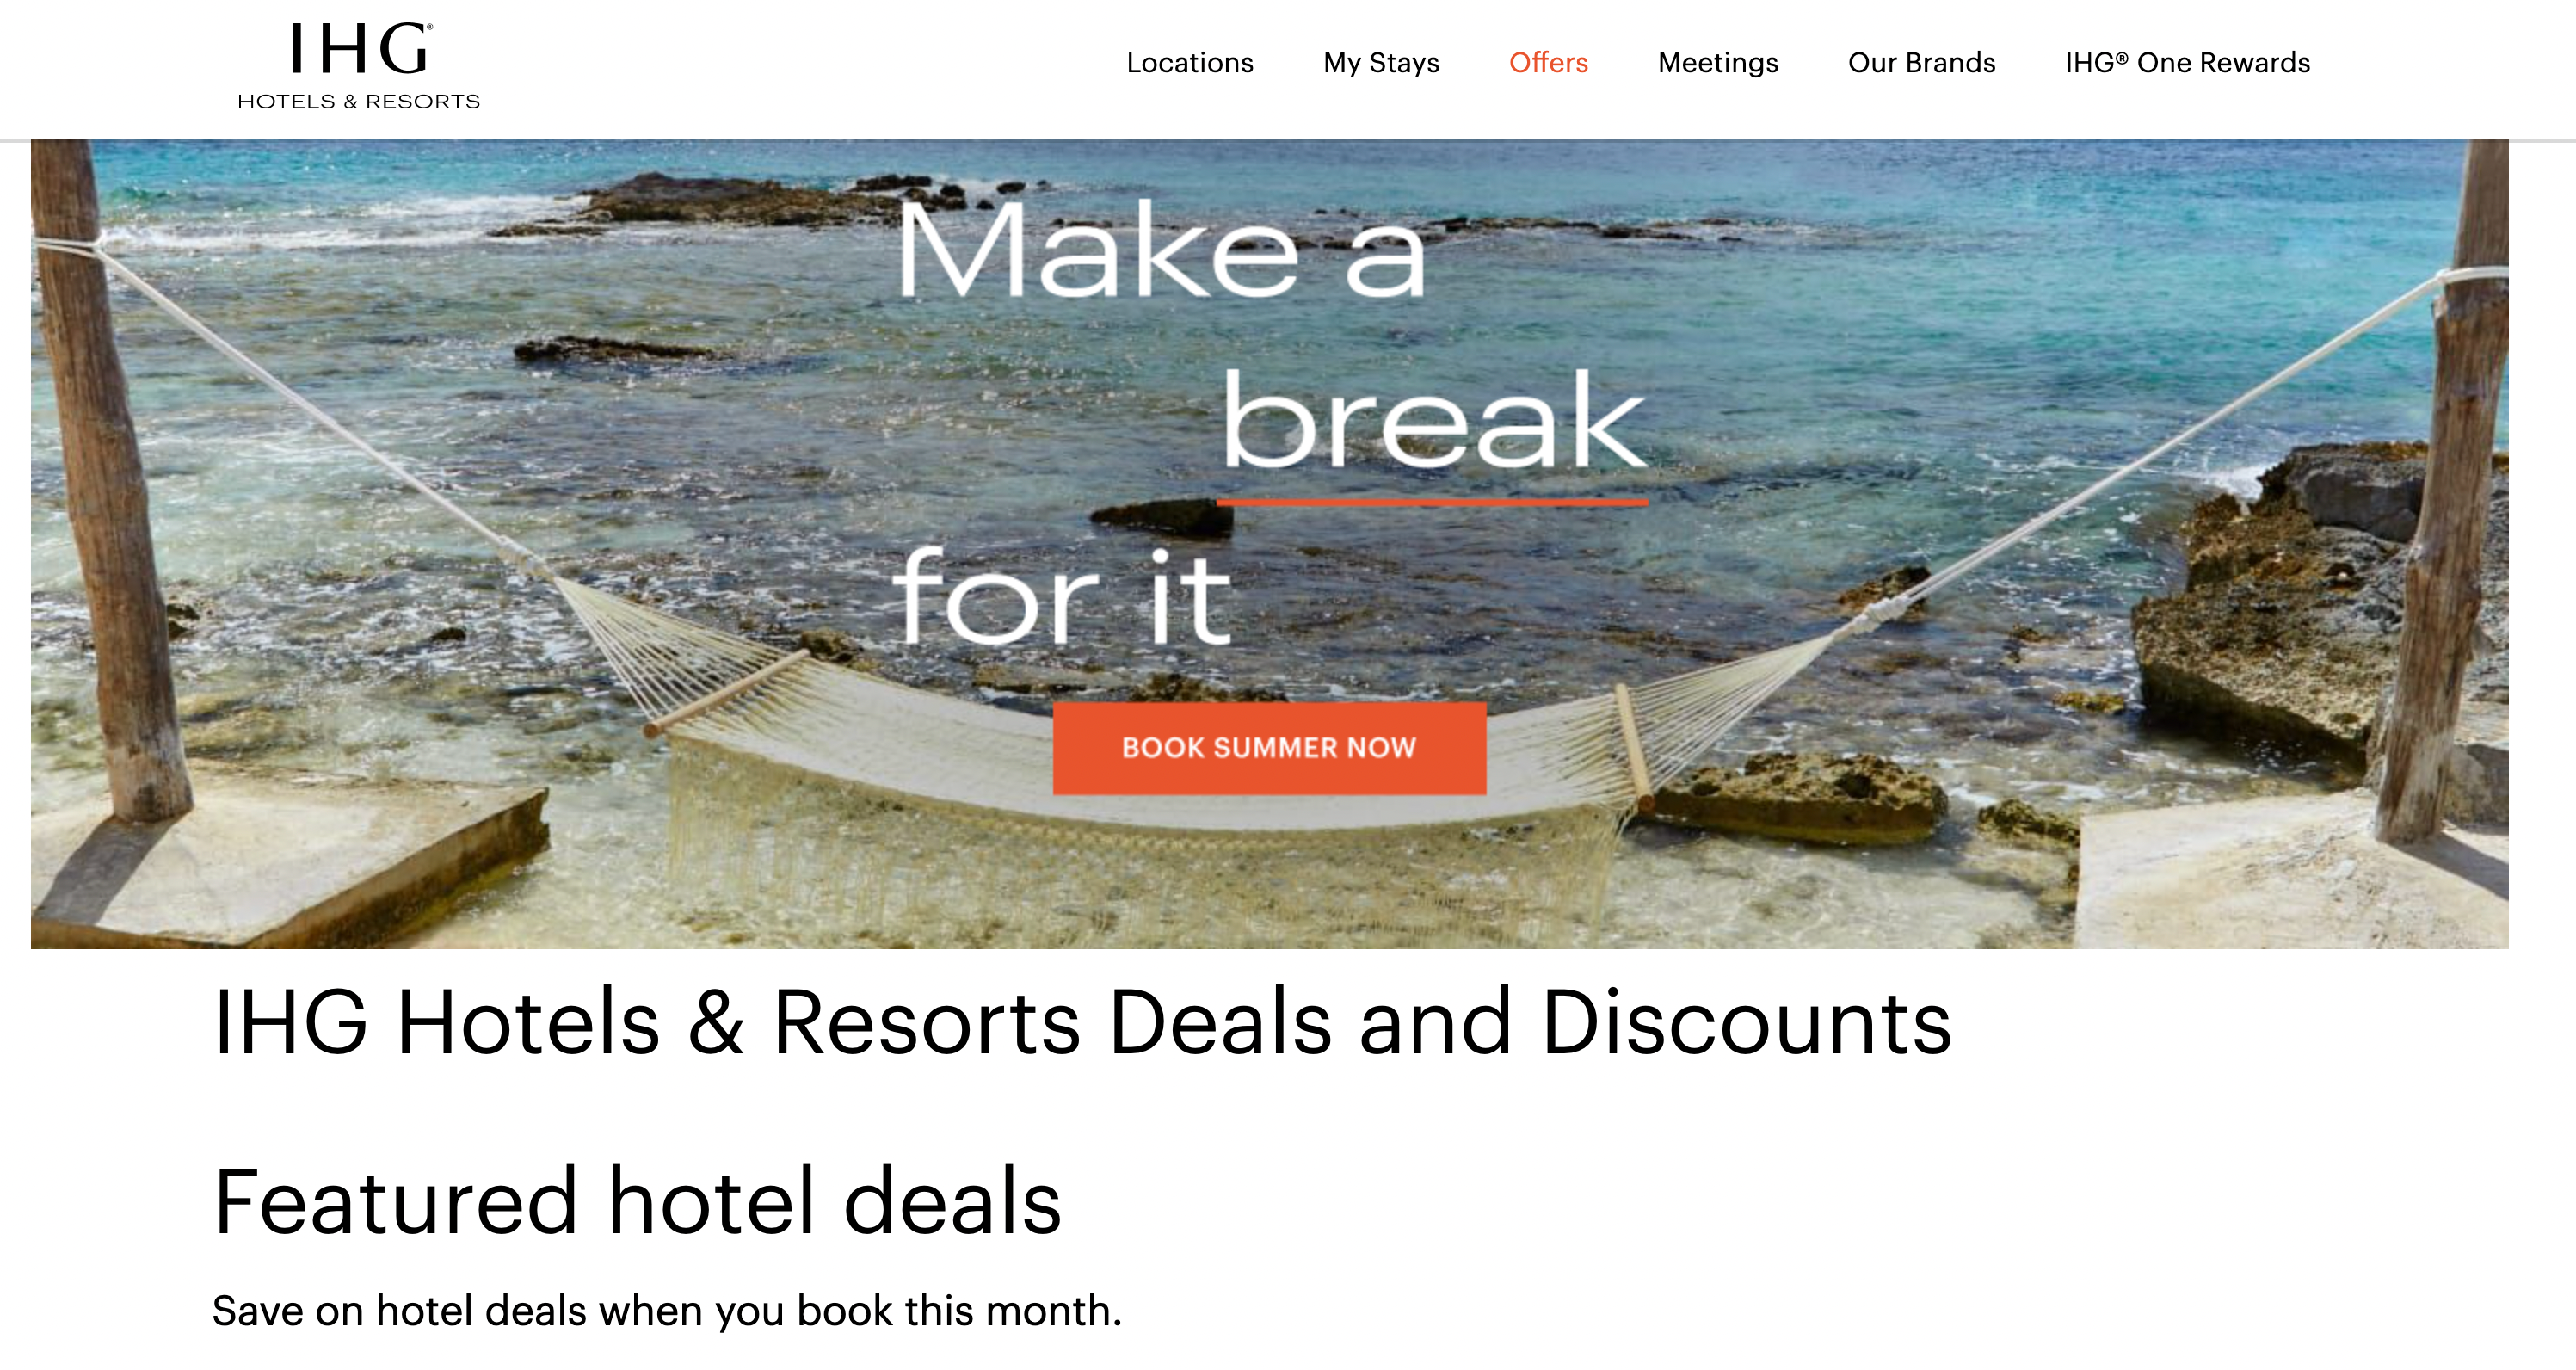 IHG offers a landing page